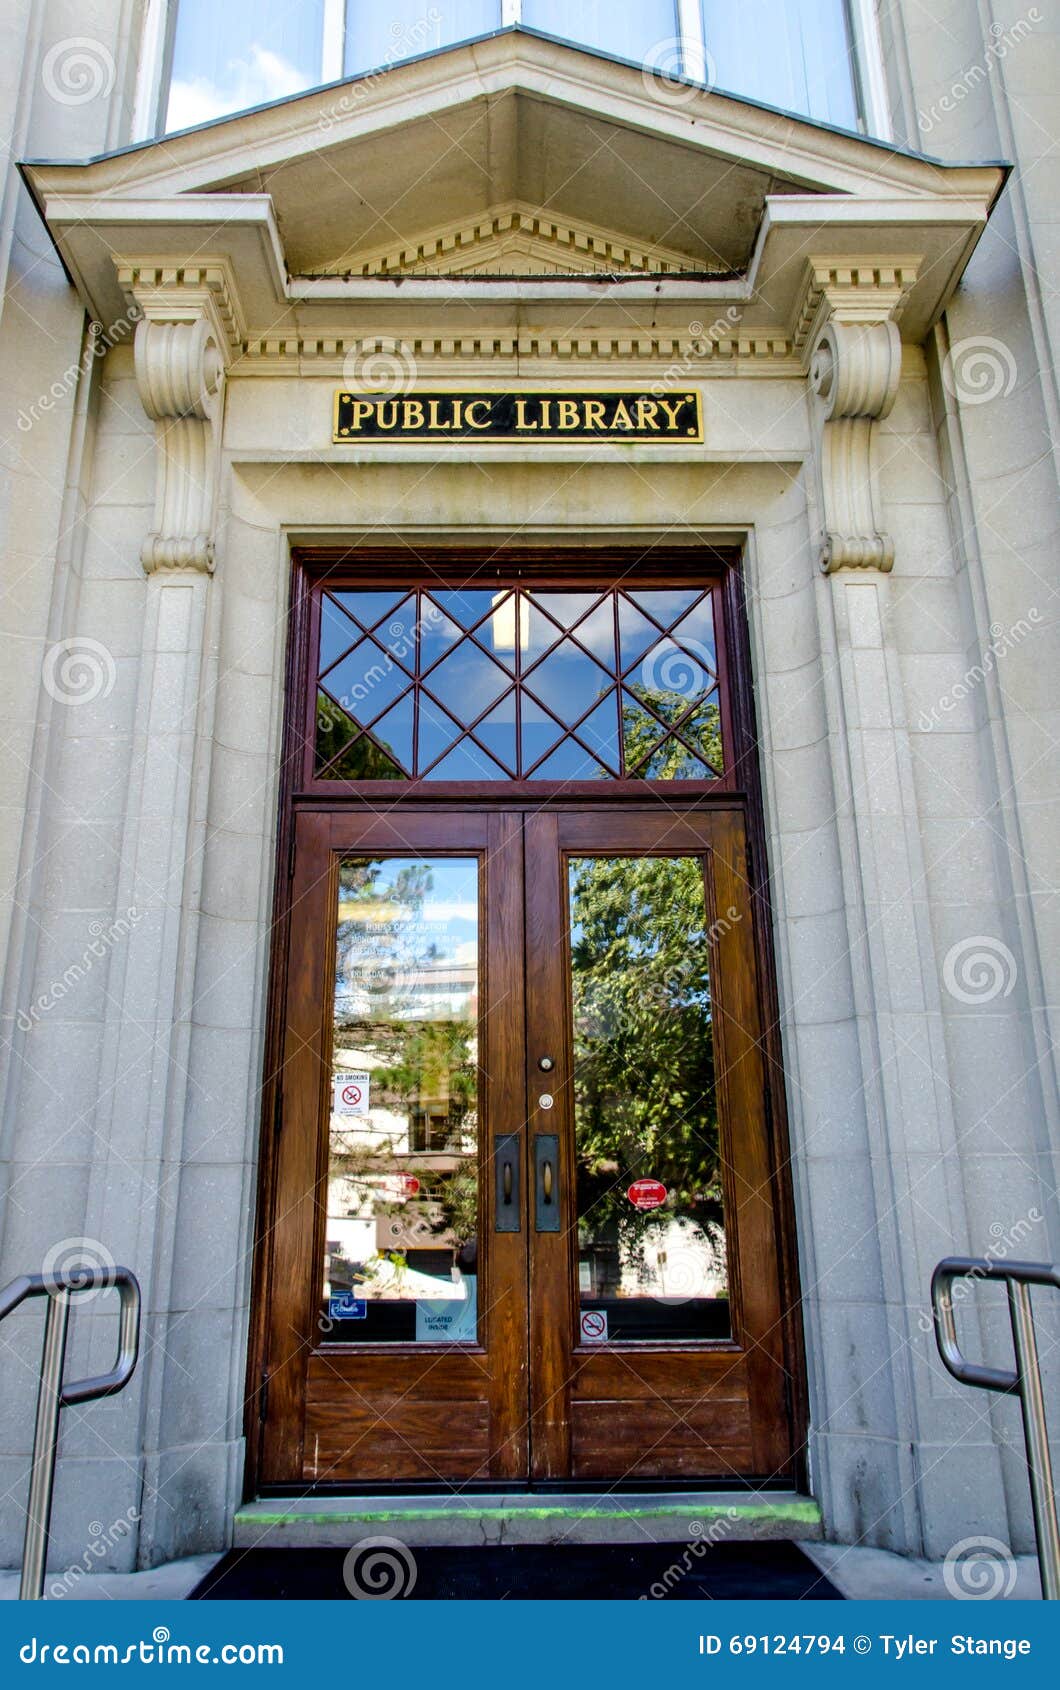 268 Library Doorway Photos Free Royalty Free Stock Photos From Dreamstime